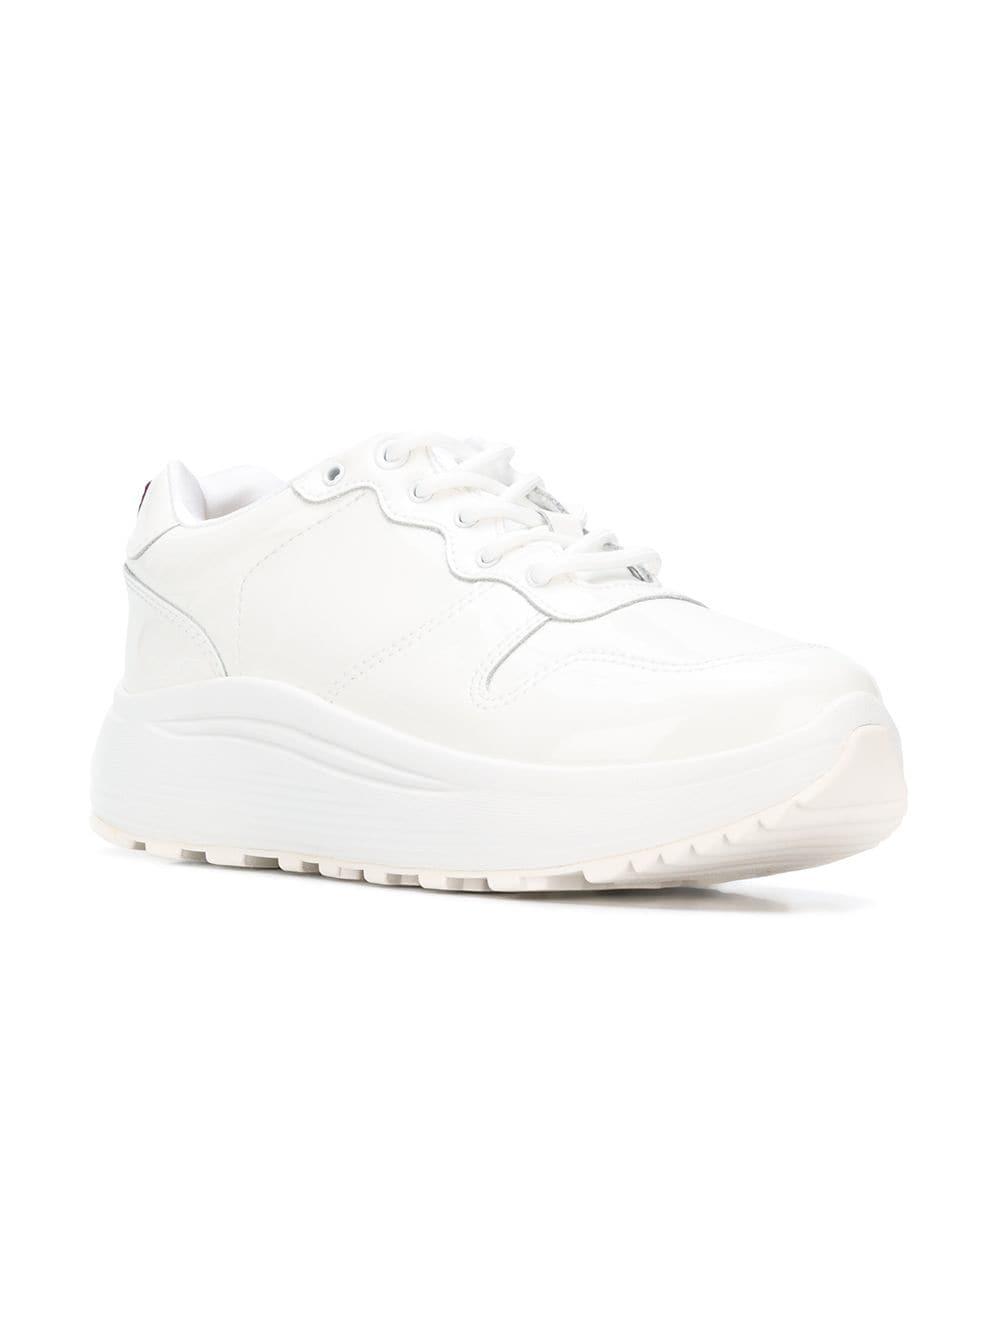 Eytys Jet Patent Leather Sneakers in White Lyst